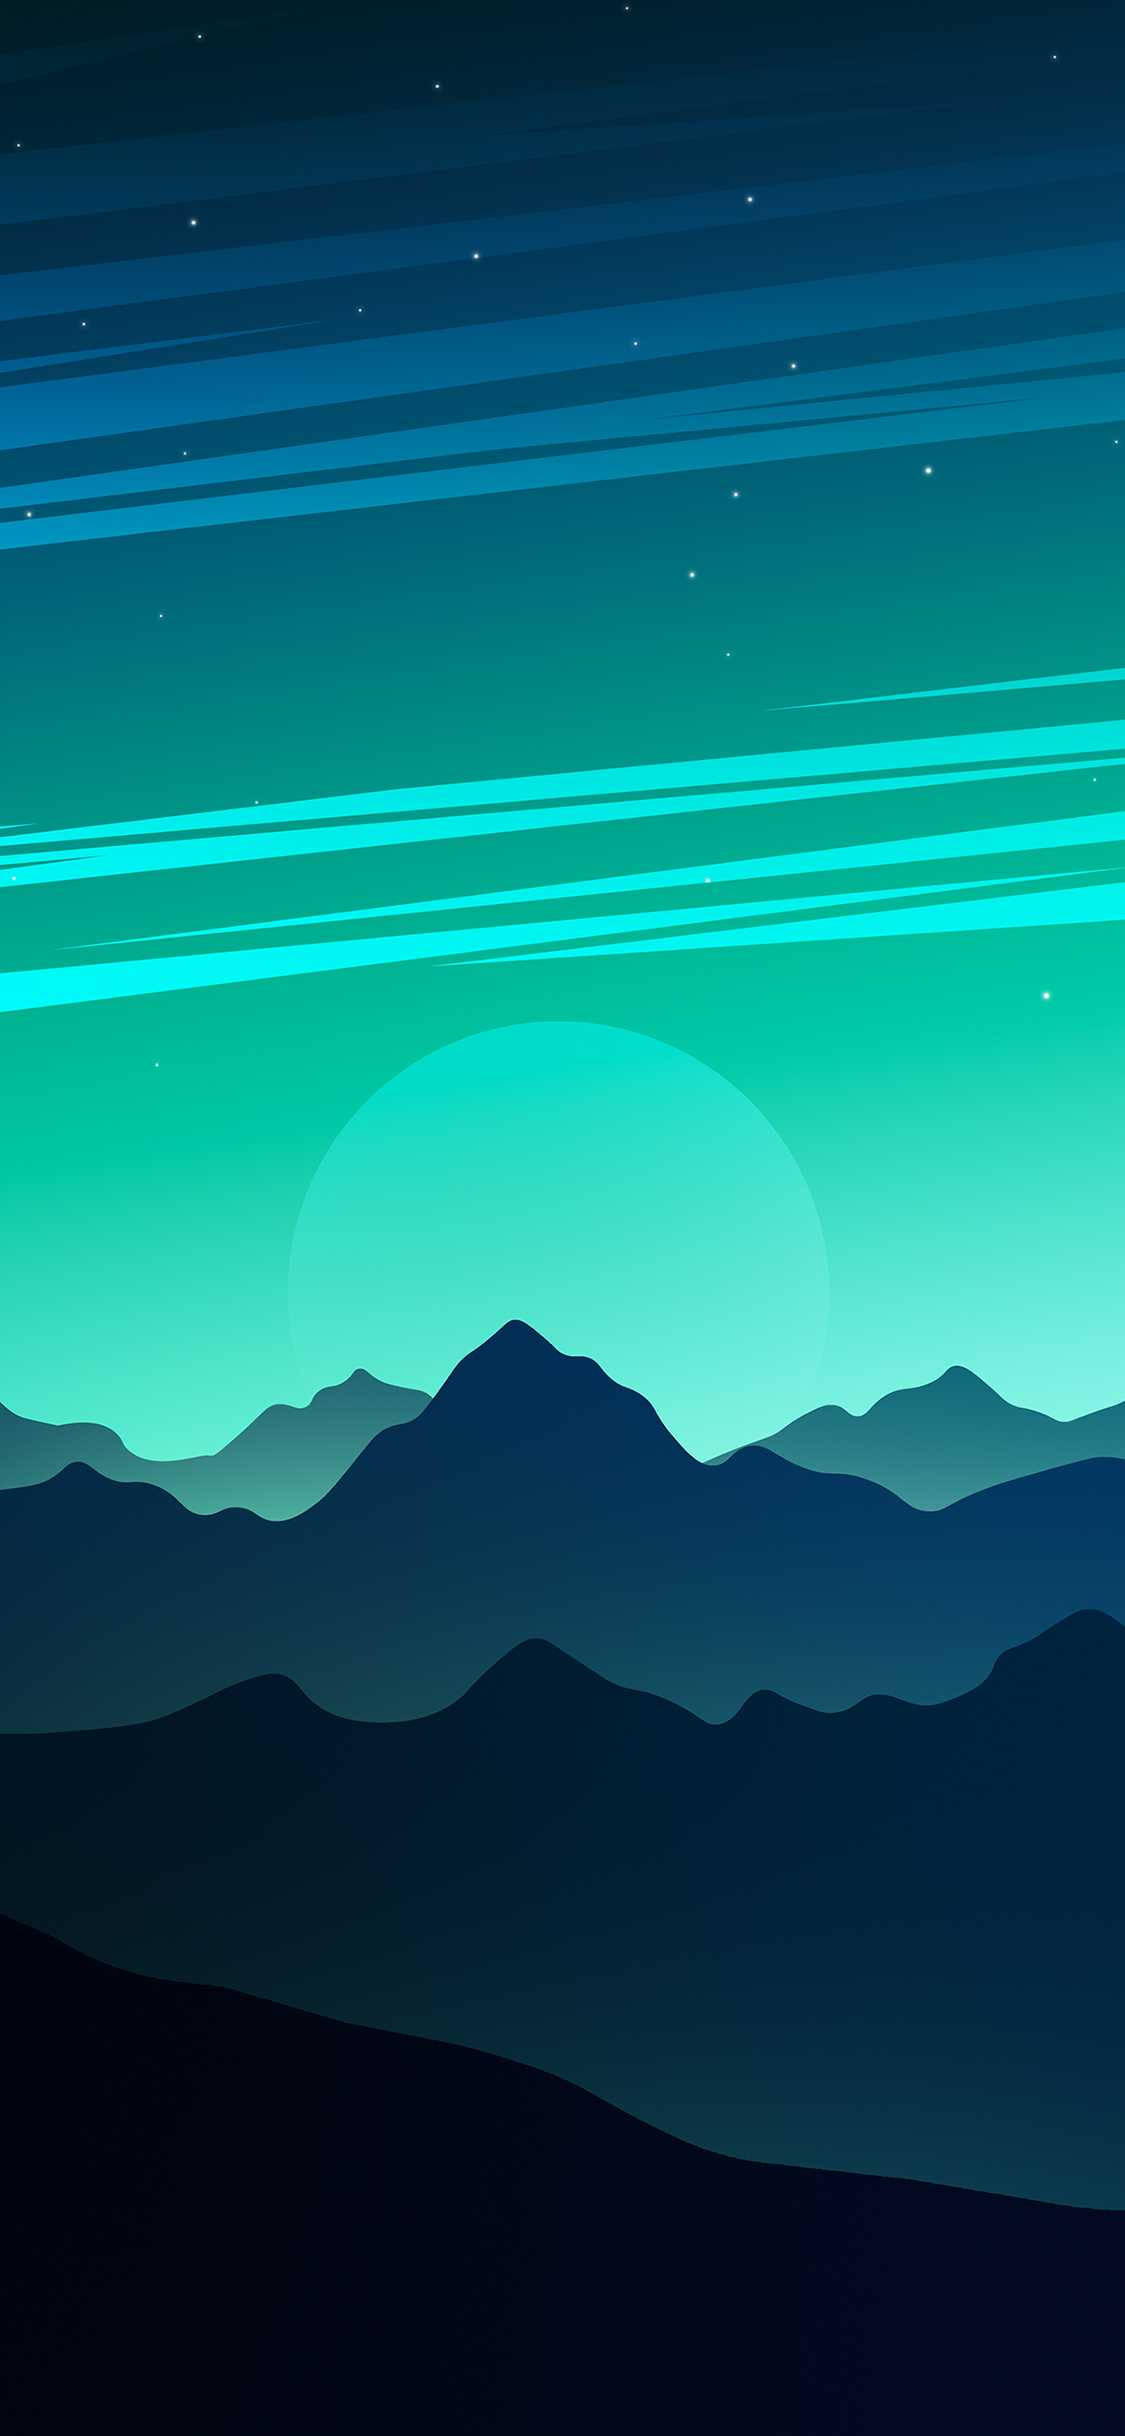 Download Teal Sky Over Mountains Ios 16 Wallpaper | Wallpapers.com